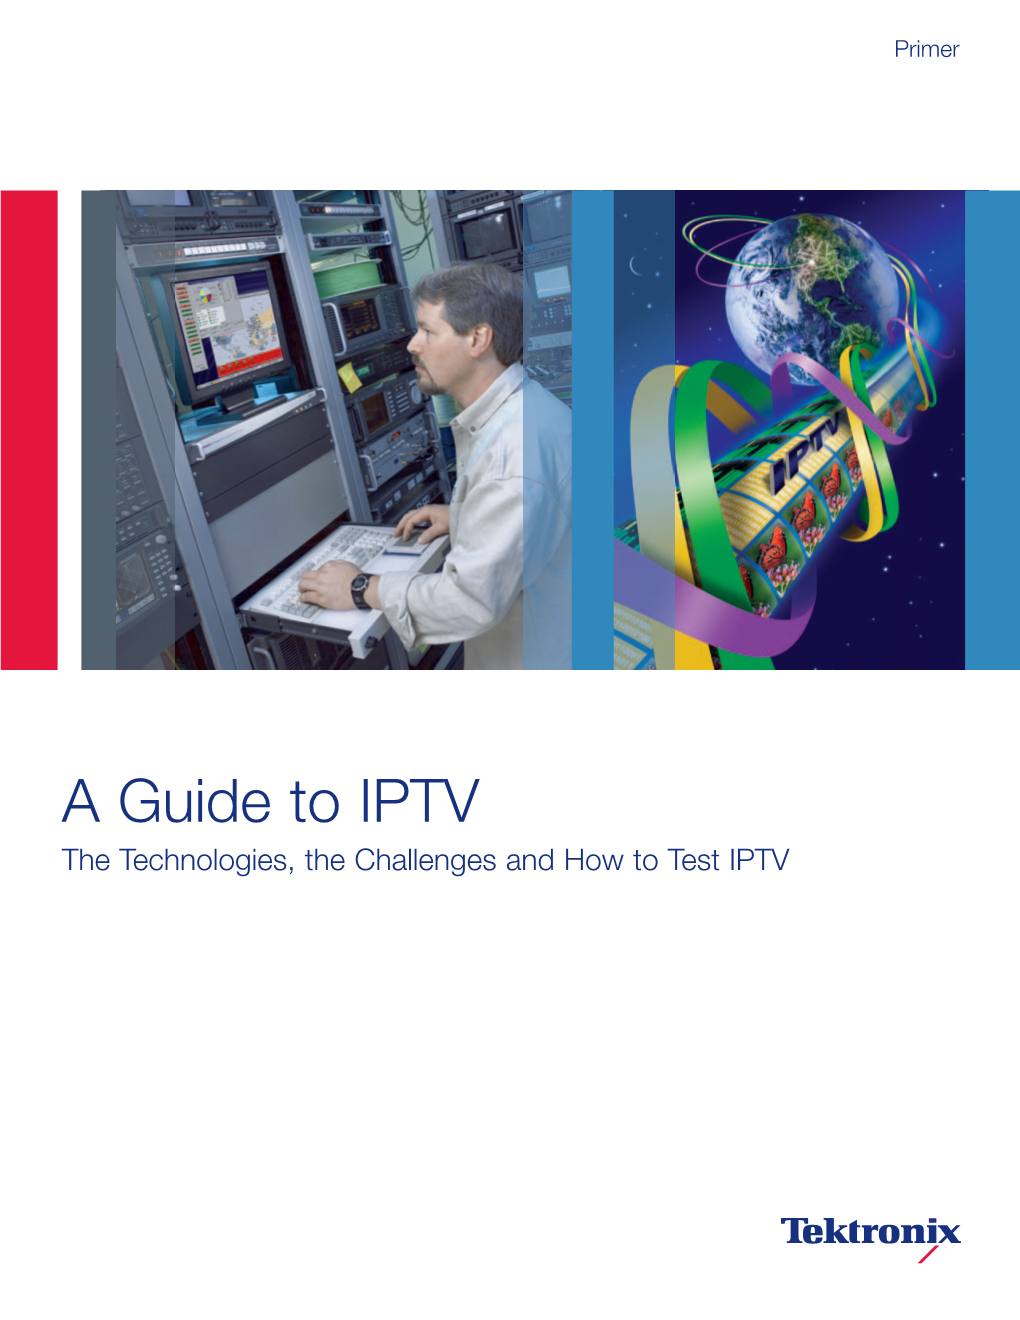 A Guide to IPTV the Technologies, the Challenges and How to Test IPTV